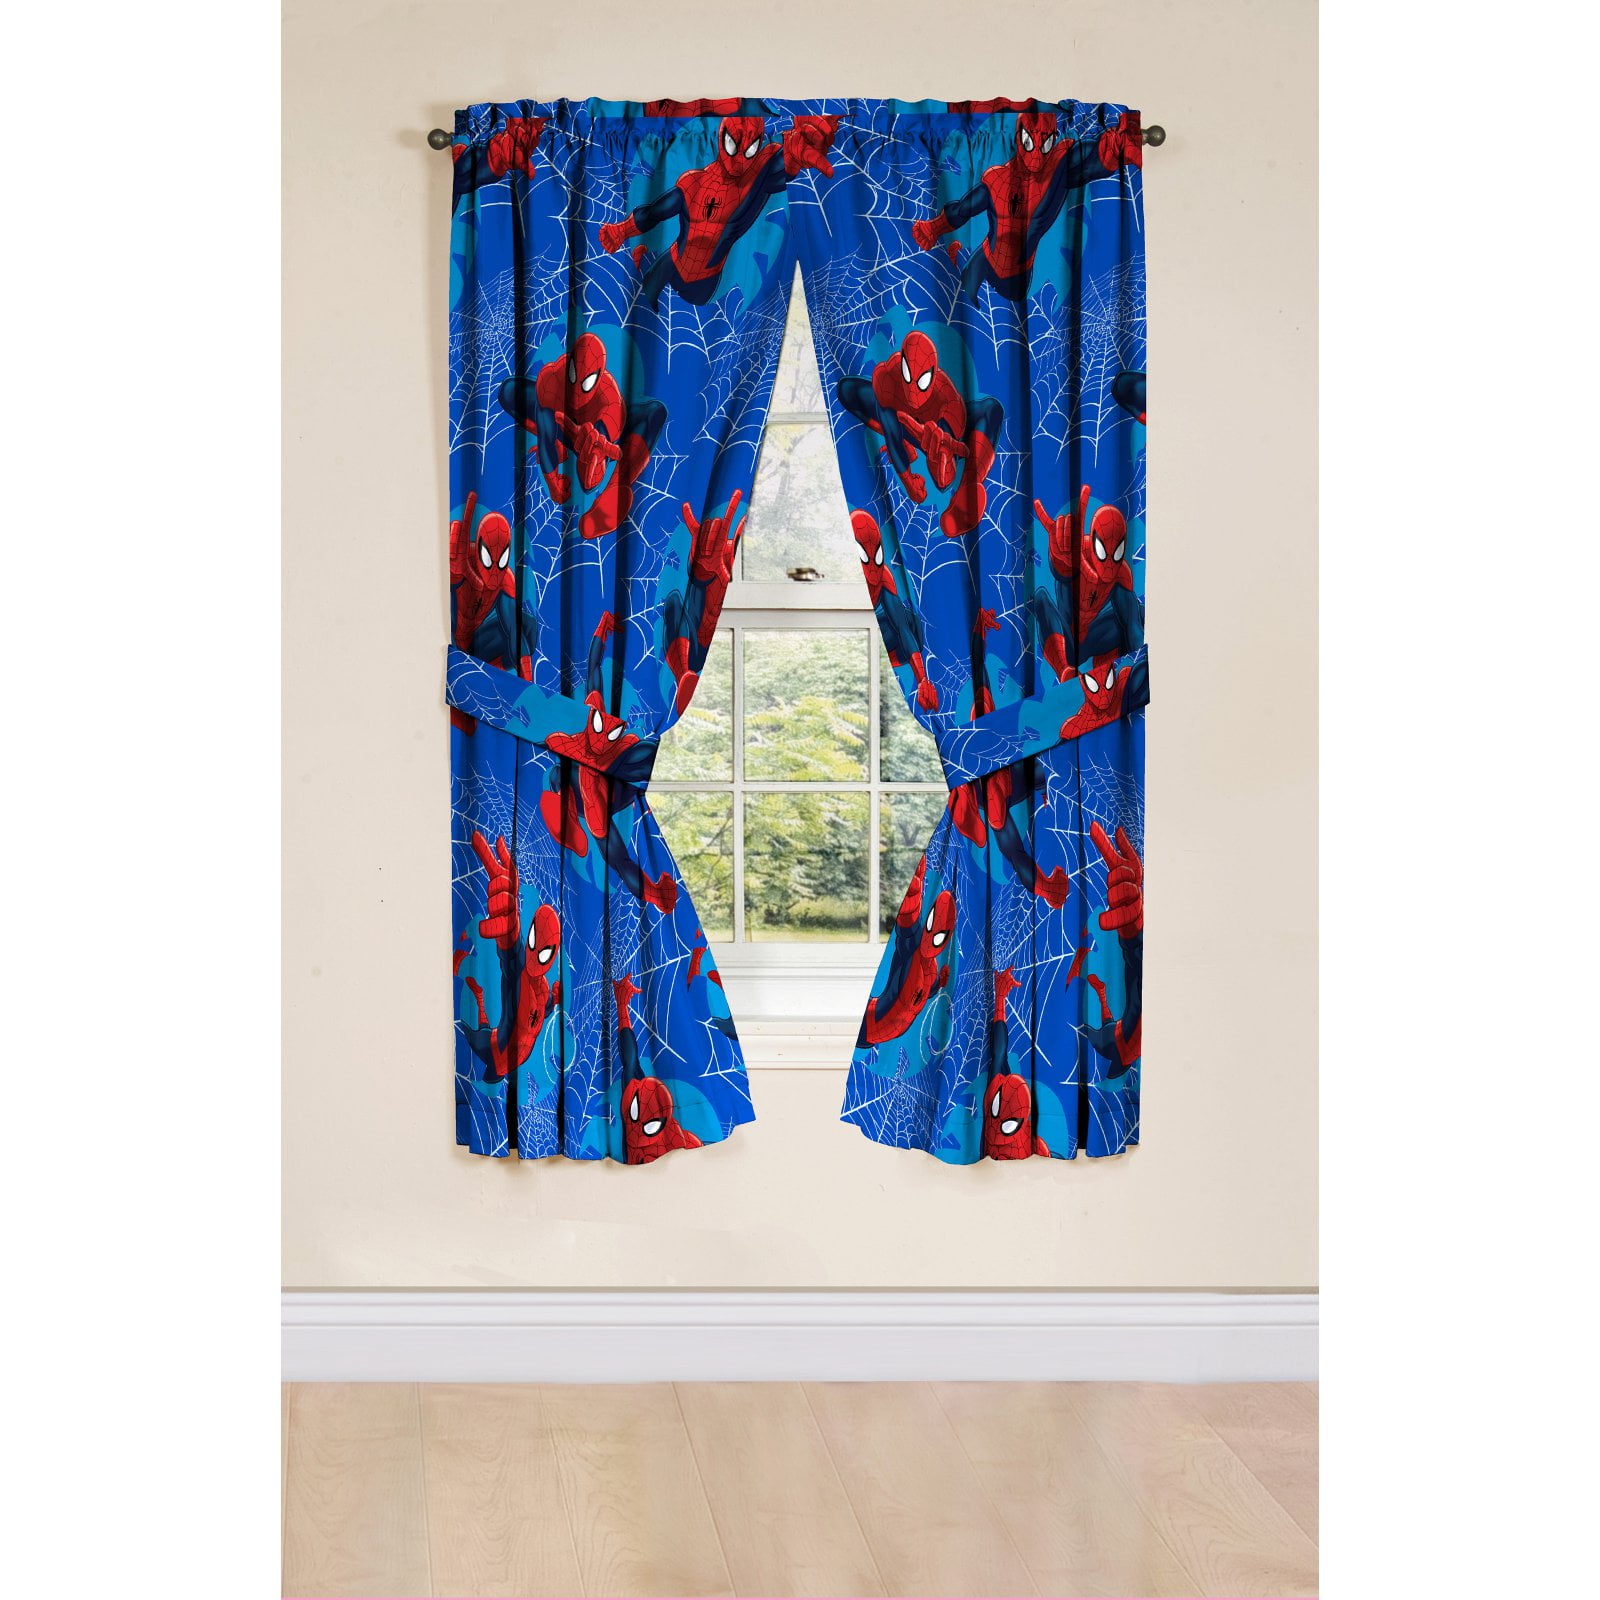 Details about   Spider-Man Far From Home Peter&MJ 2 Panel Blackout Indoor Window Curtain Drapes 